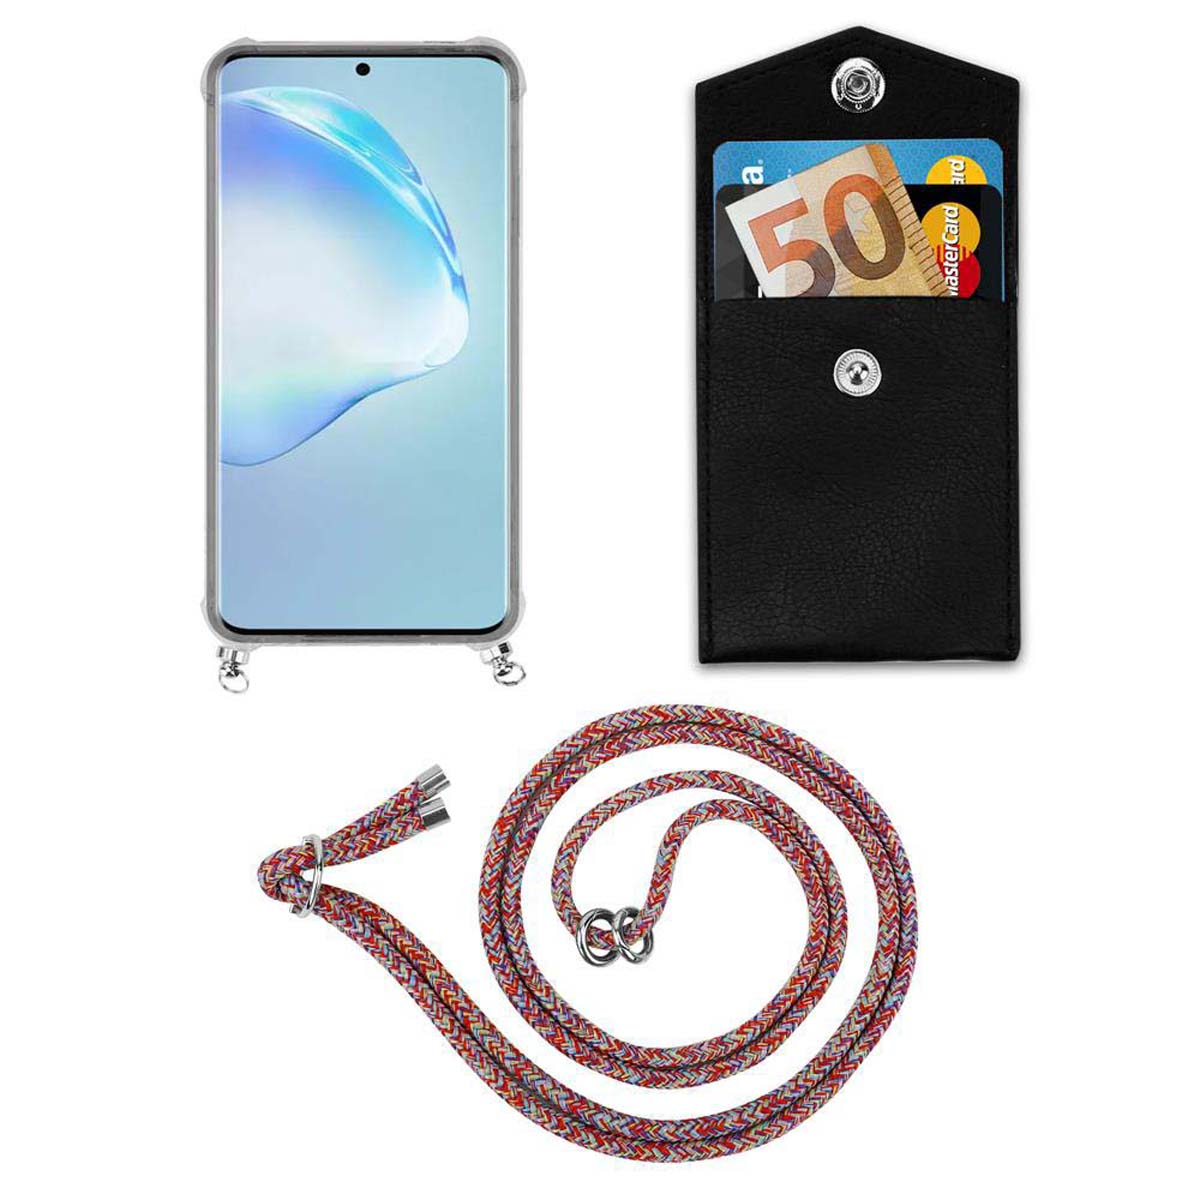 CADORABO Handy Kette Kordel Ringen, Galaxy Backcover, S20 PARROT Samsung, Band abnehmbarer Silber und Hülle, mit PLUS, COLORFUL